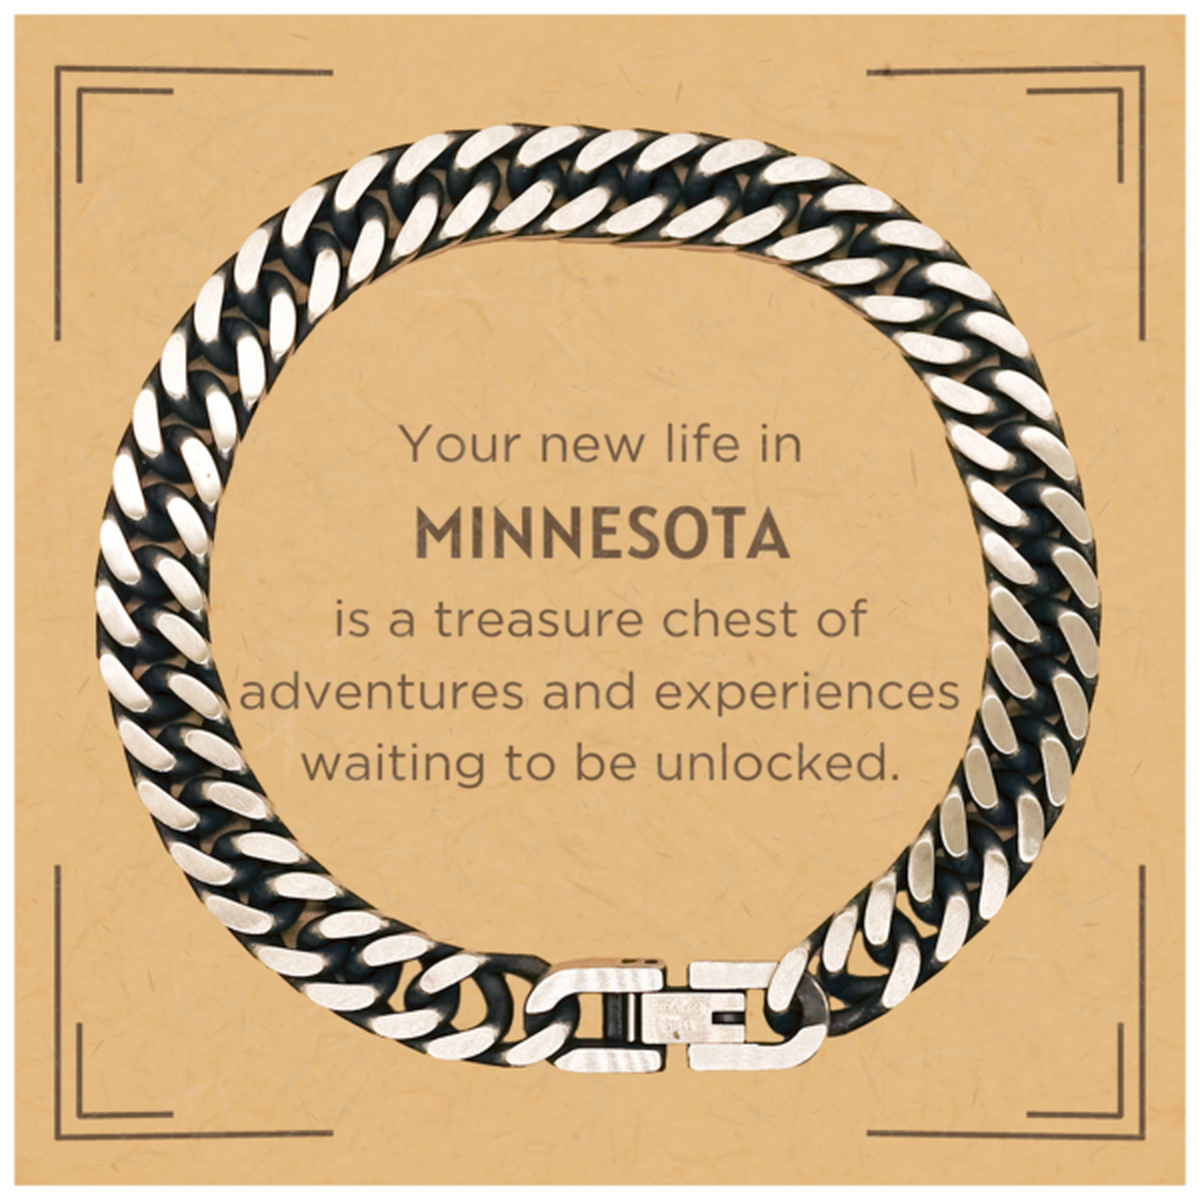 Moving to Minnesota Gifts, Your new life in Minnesota, Long Distance Minnesota Christmas Cuban Link Chain Bracelet For Men, Women, Friends, Coworkers